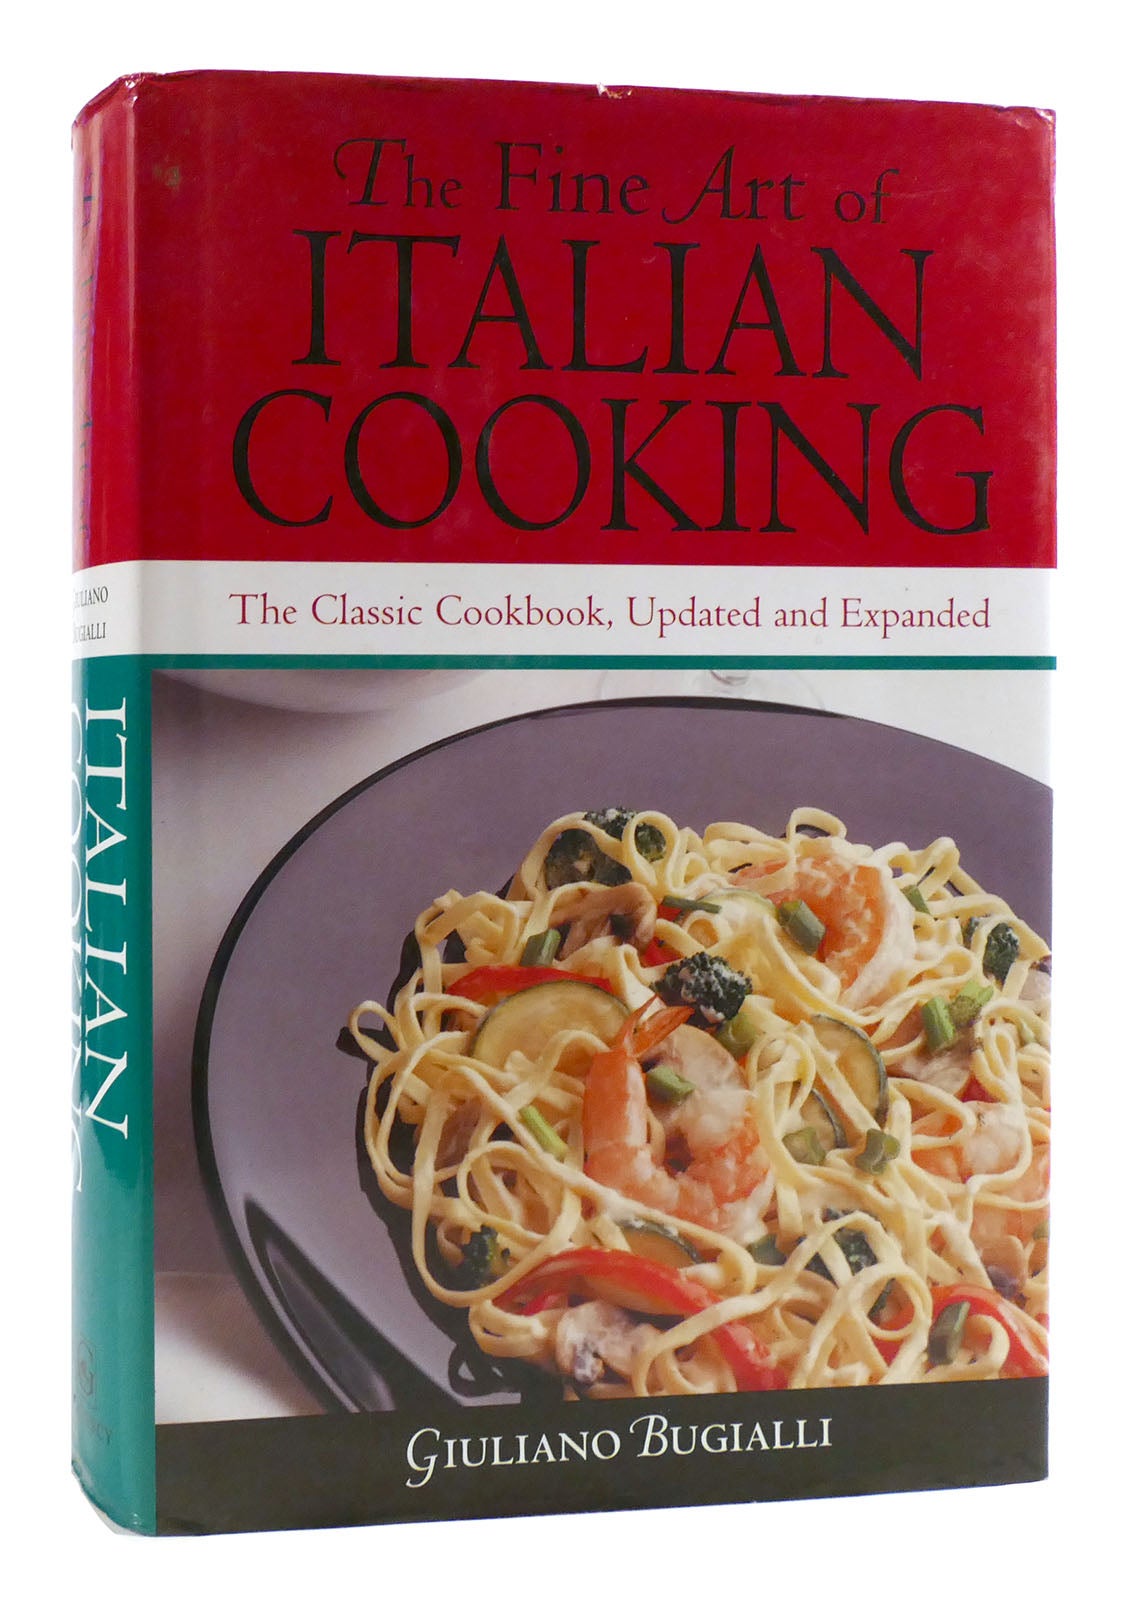 THE FINE ART OF ITALIAN COOKING